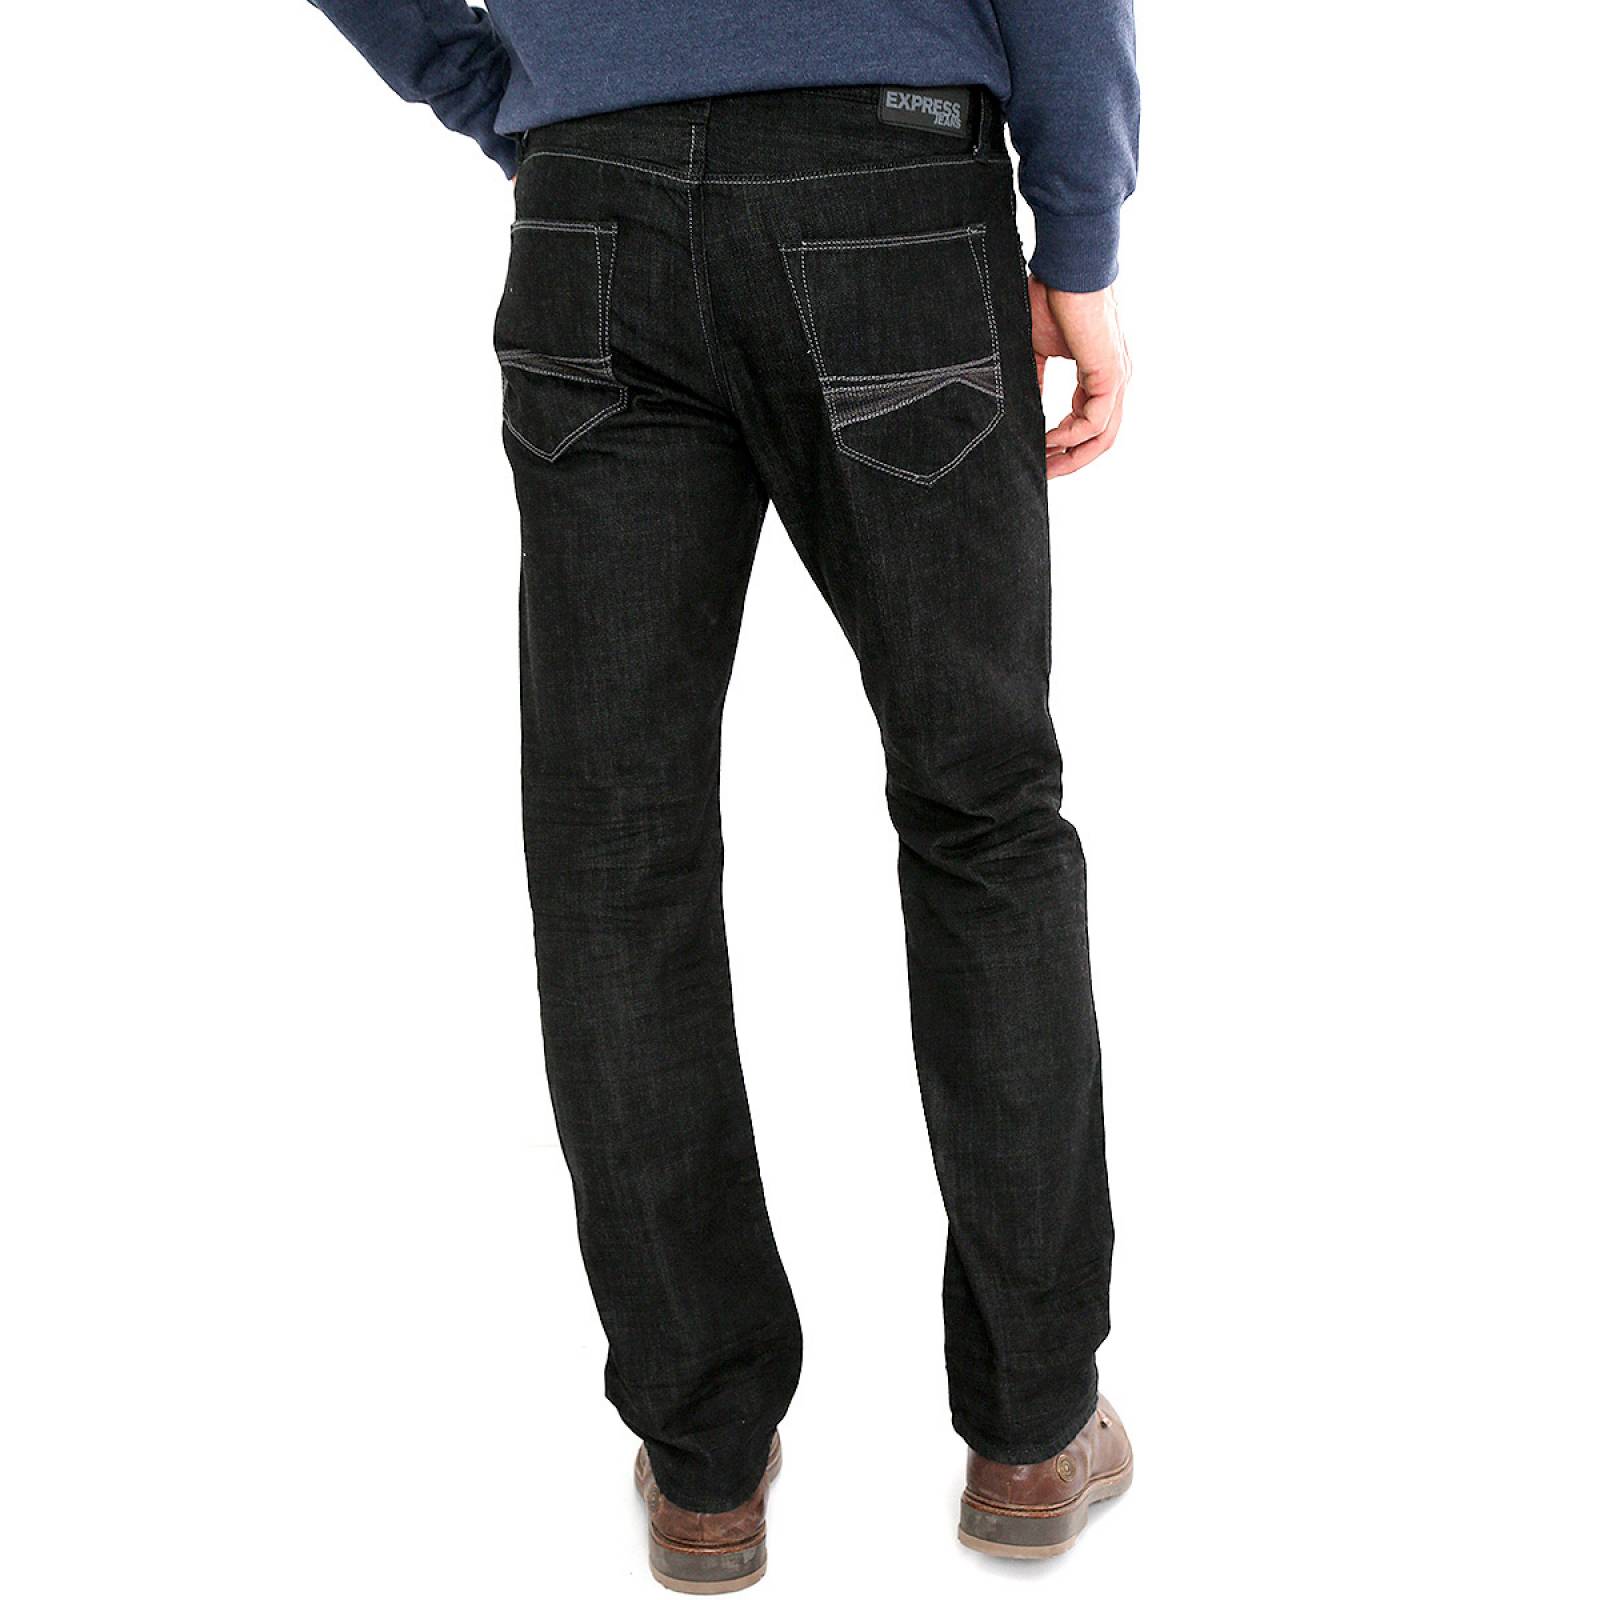 Jeans Negro by Express